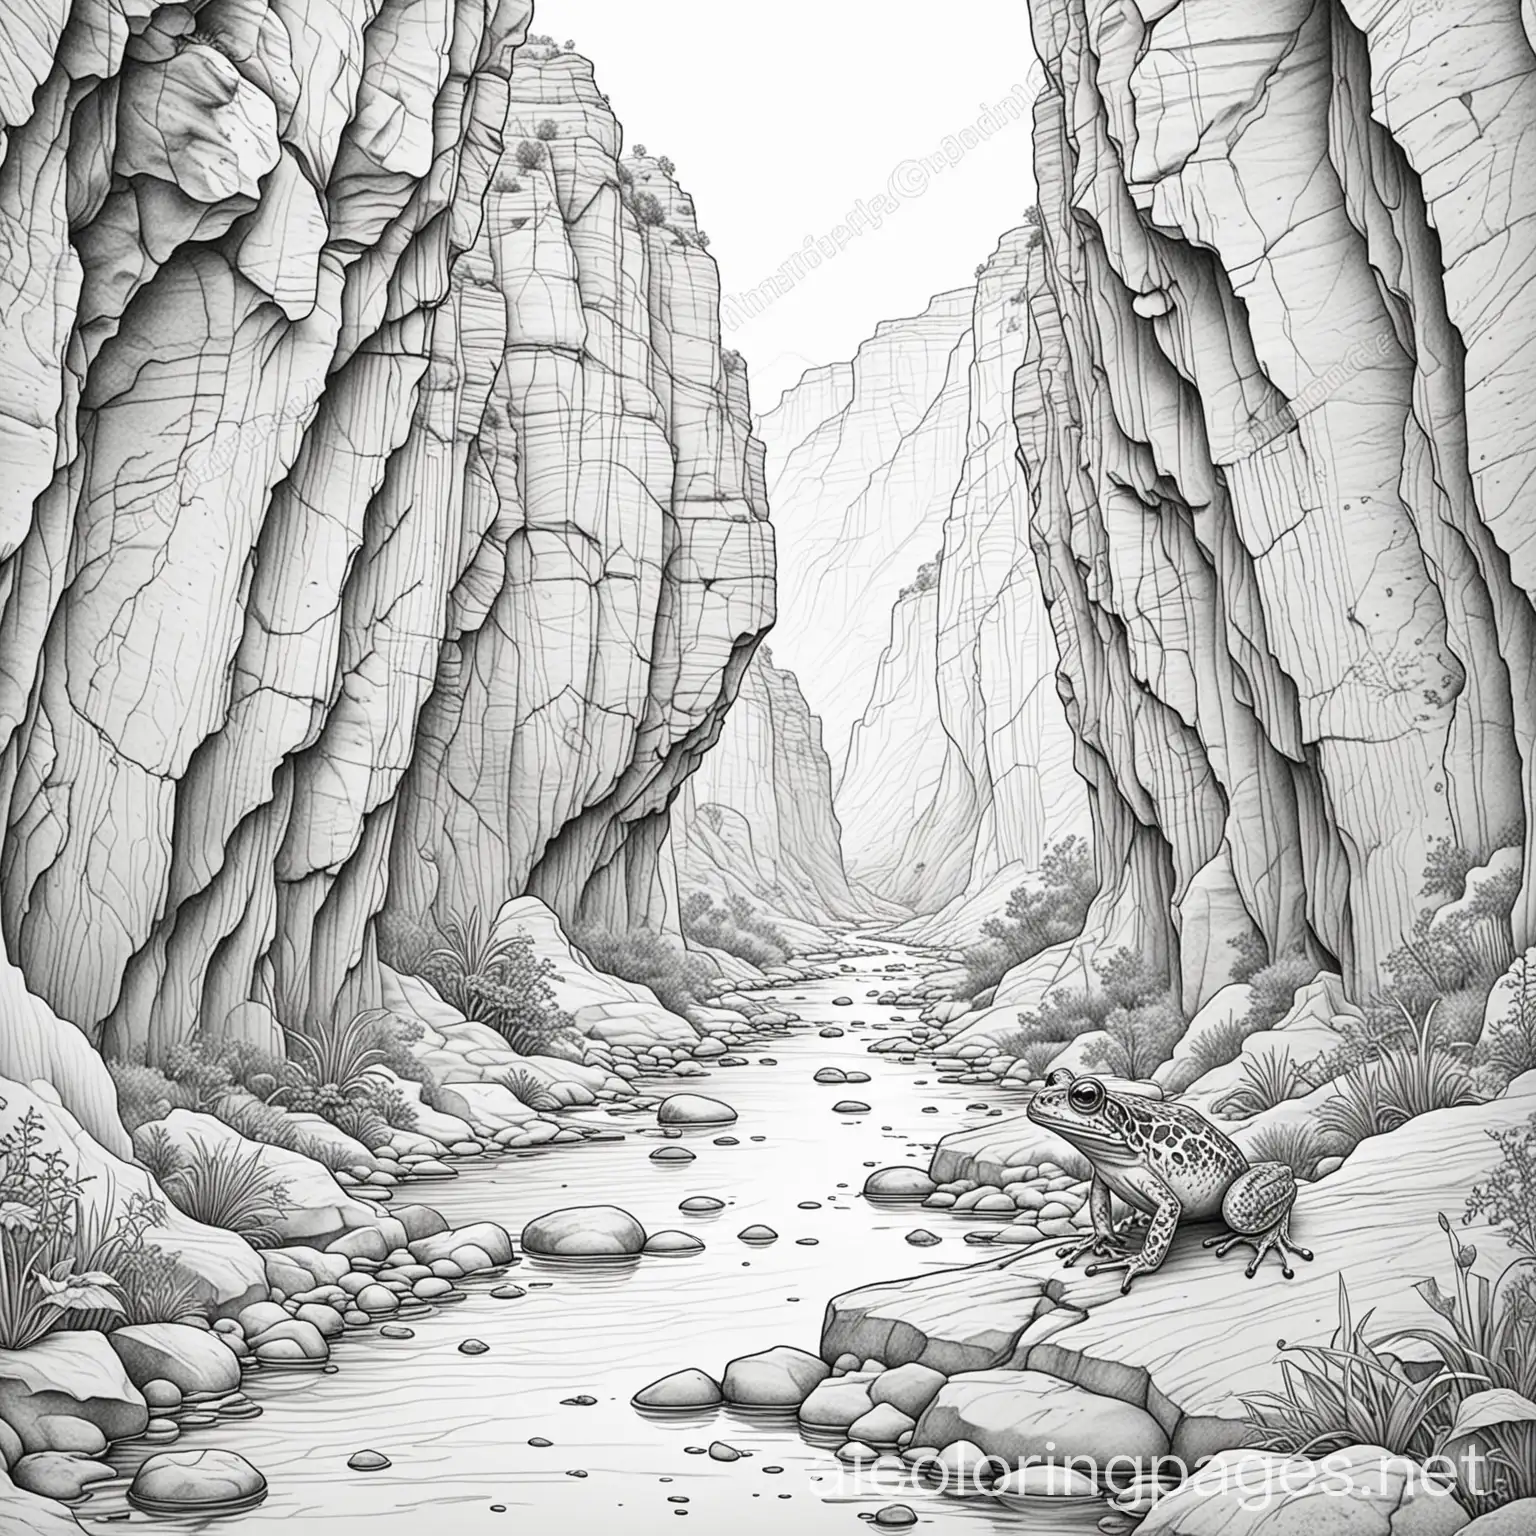 Canyon-Scene-Coloring-Page-with-Hidden-Frogs